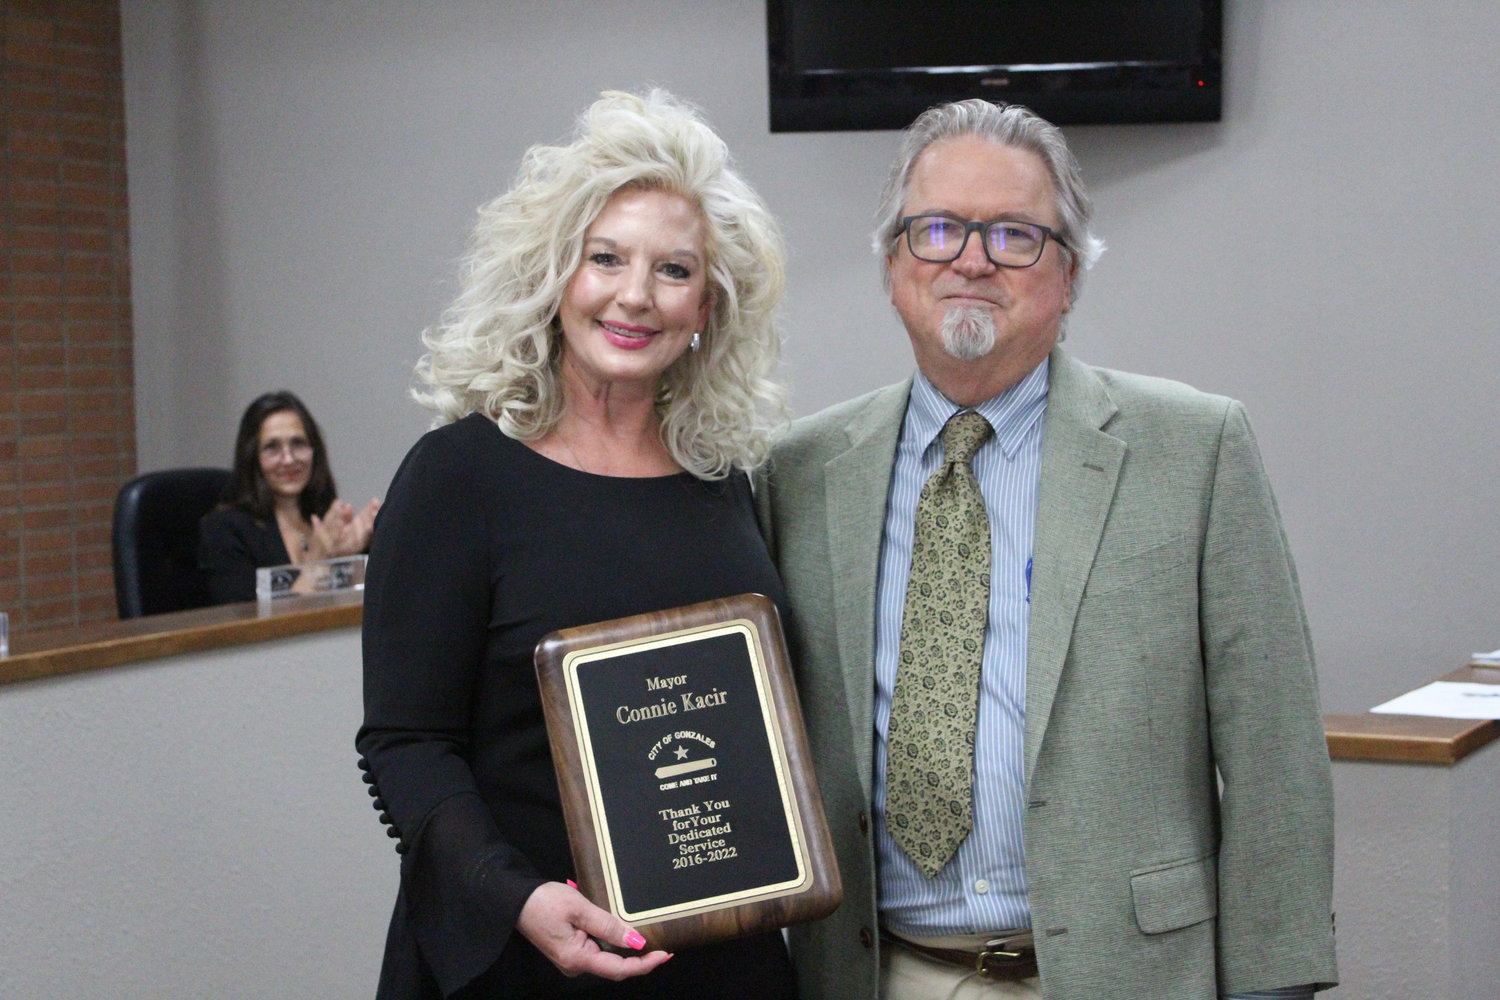 New Gonzales mayor, S.H. “Steve” Sucher (Right), with former Mayor Connie Kacir (Left) as she received a plaque honoring six years of services to the city.